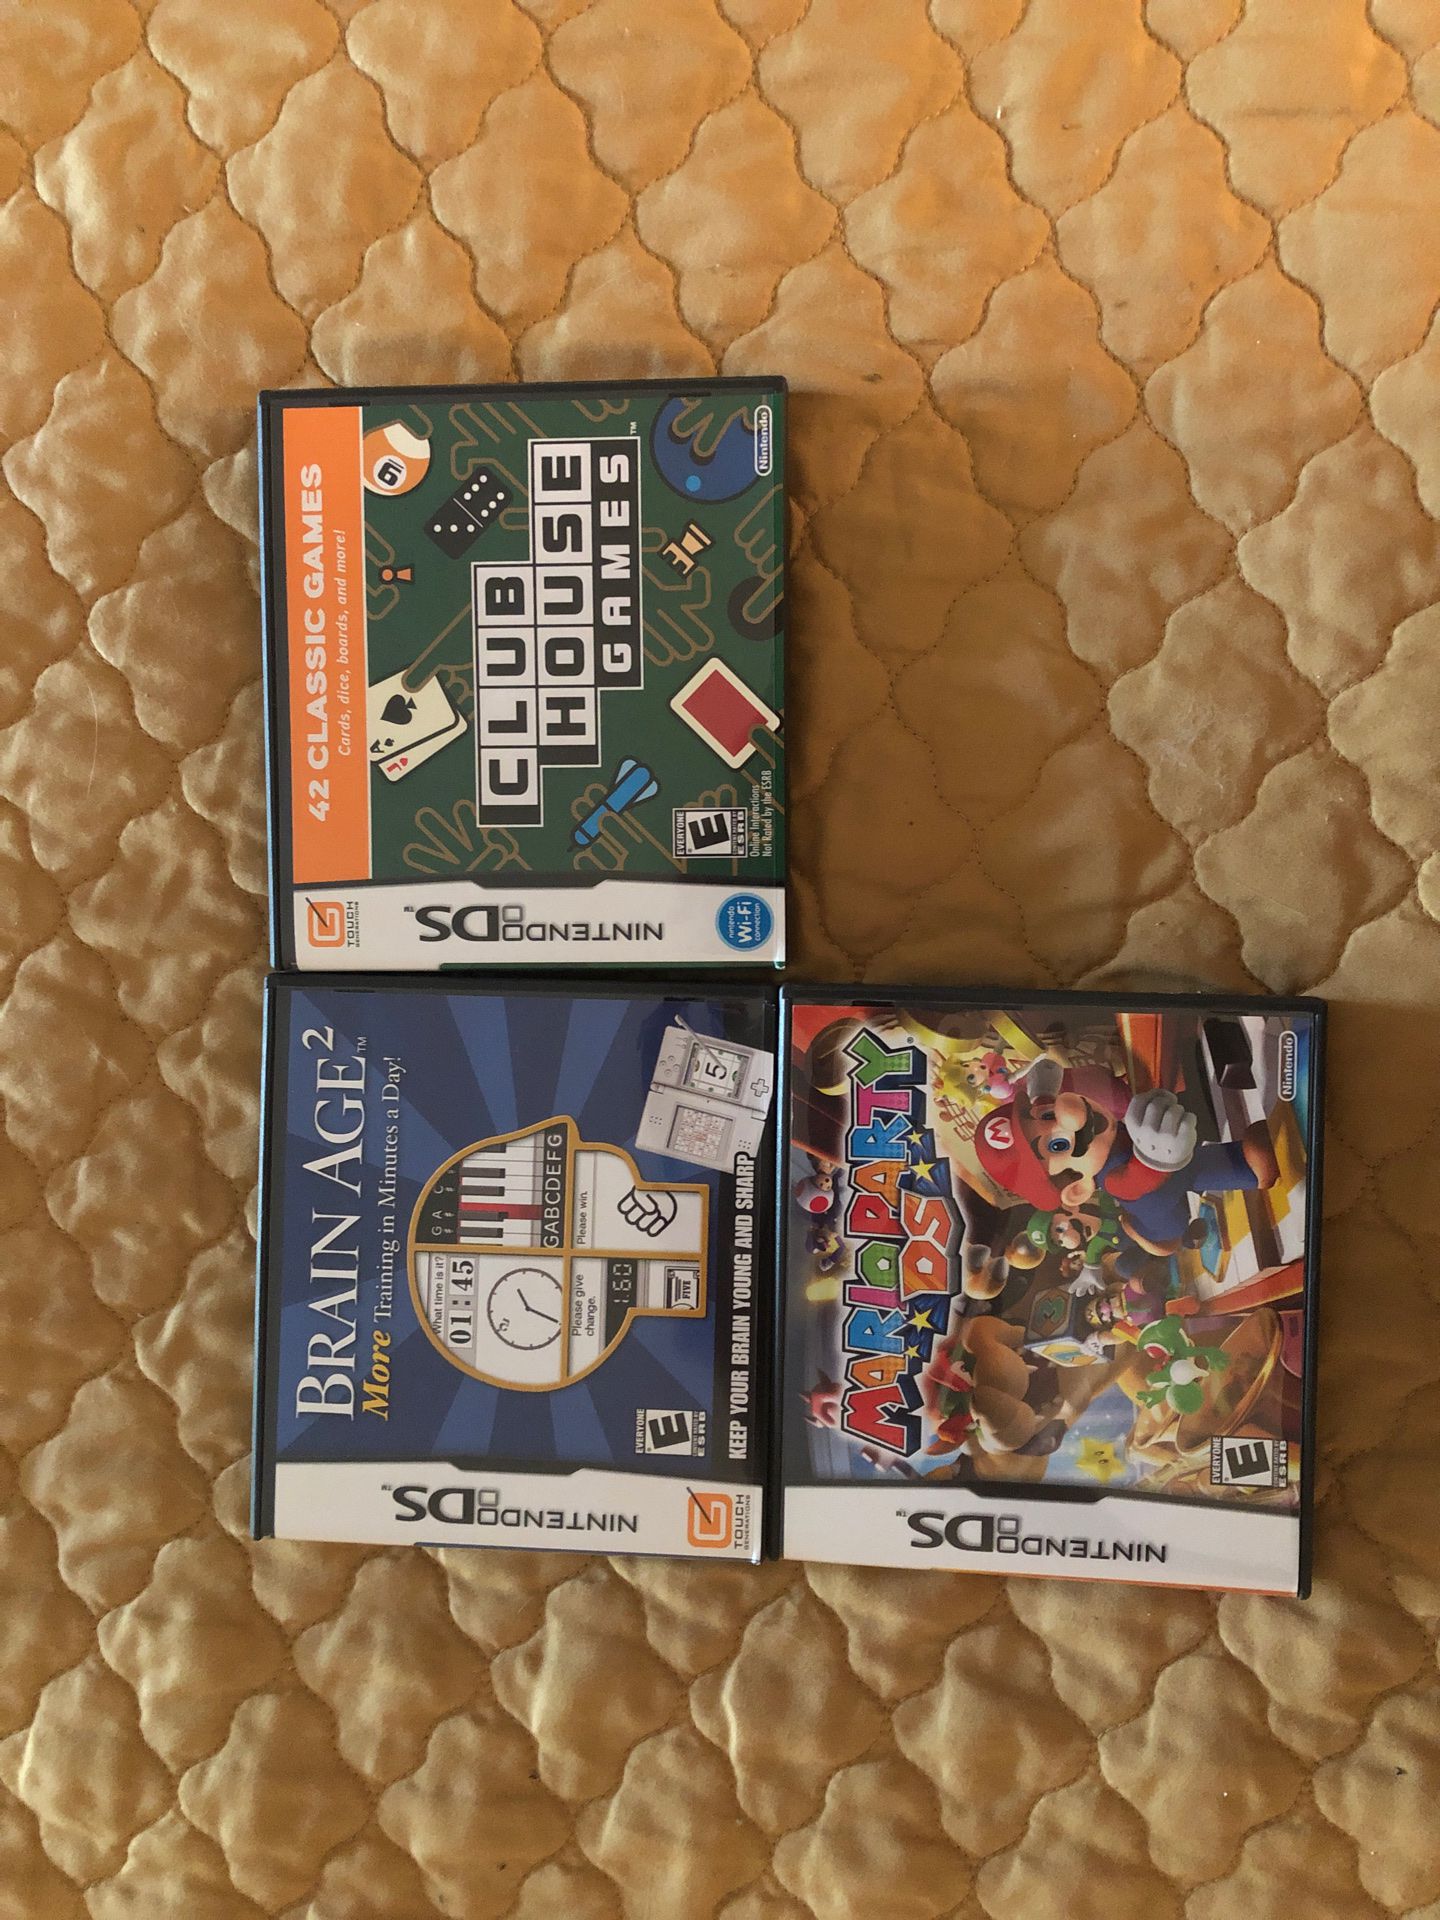 DS games Mario party, brain age 2, club house games